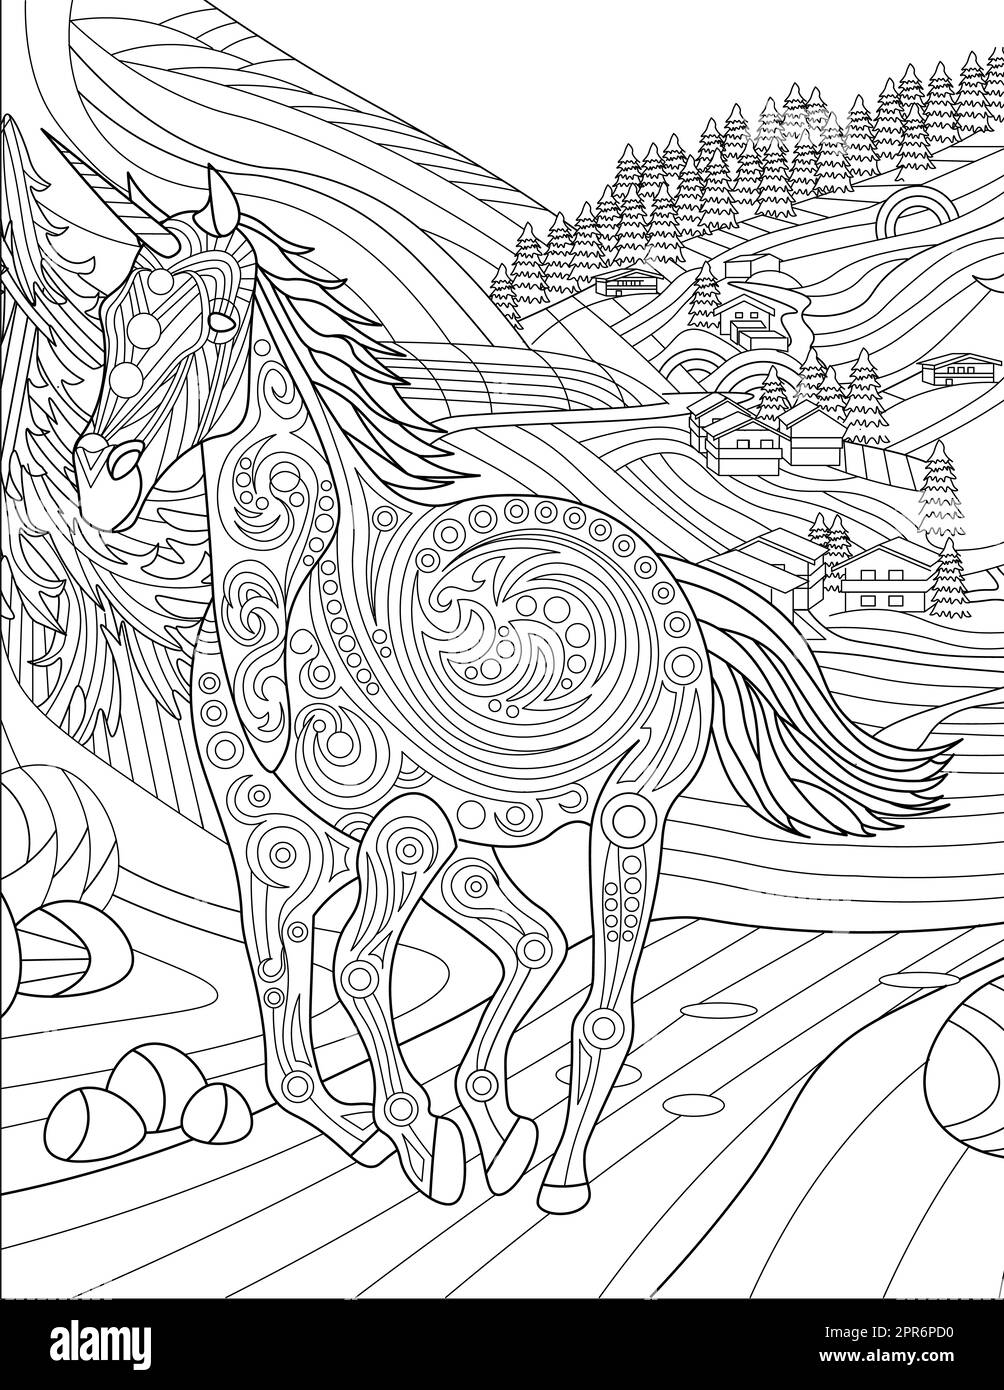 Unicorn Running Away From Village With Large Trees Line Drawing. Stock Photo